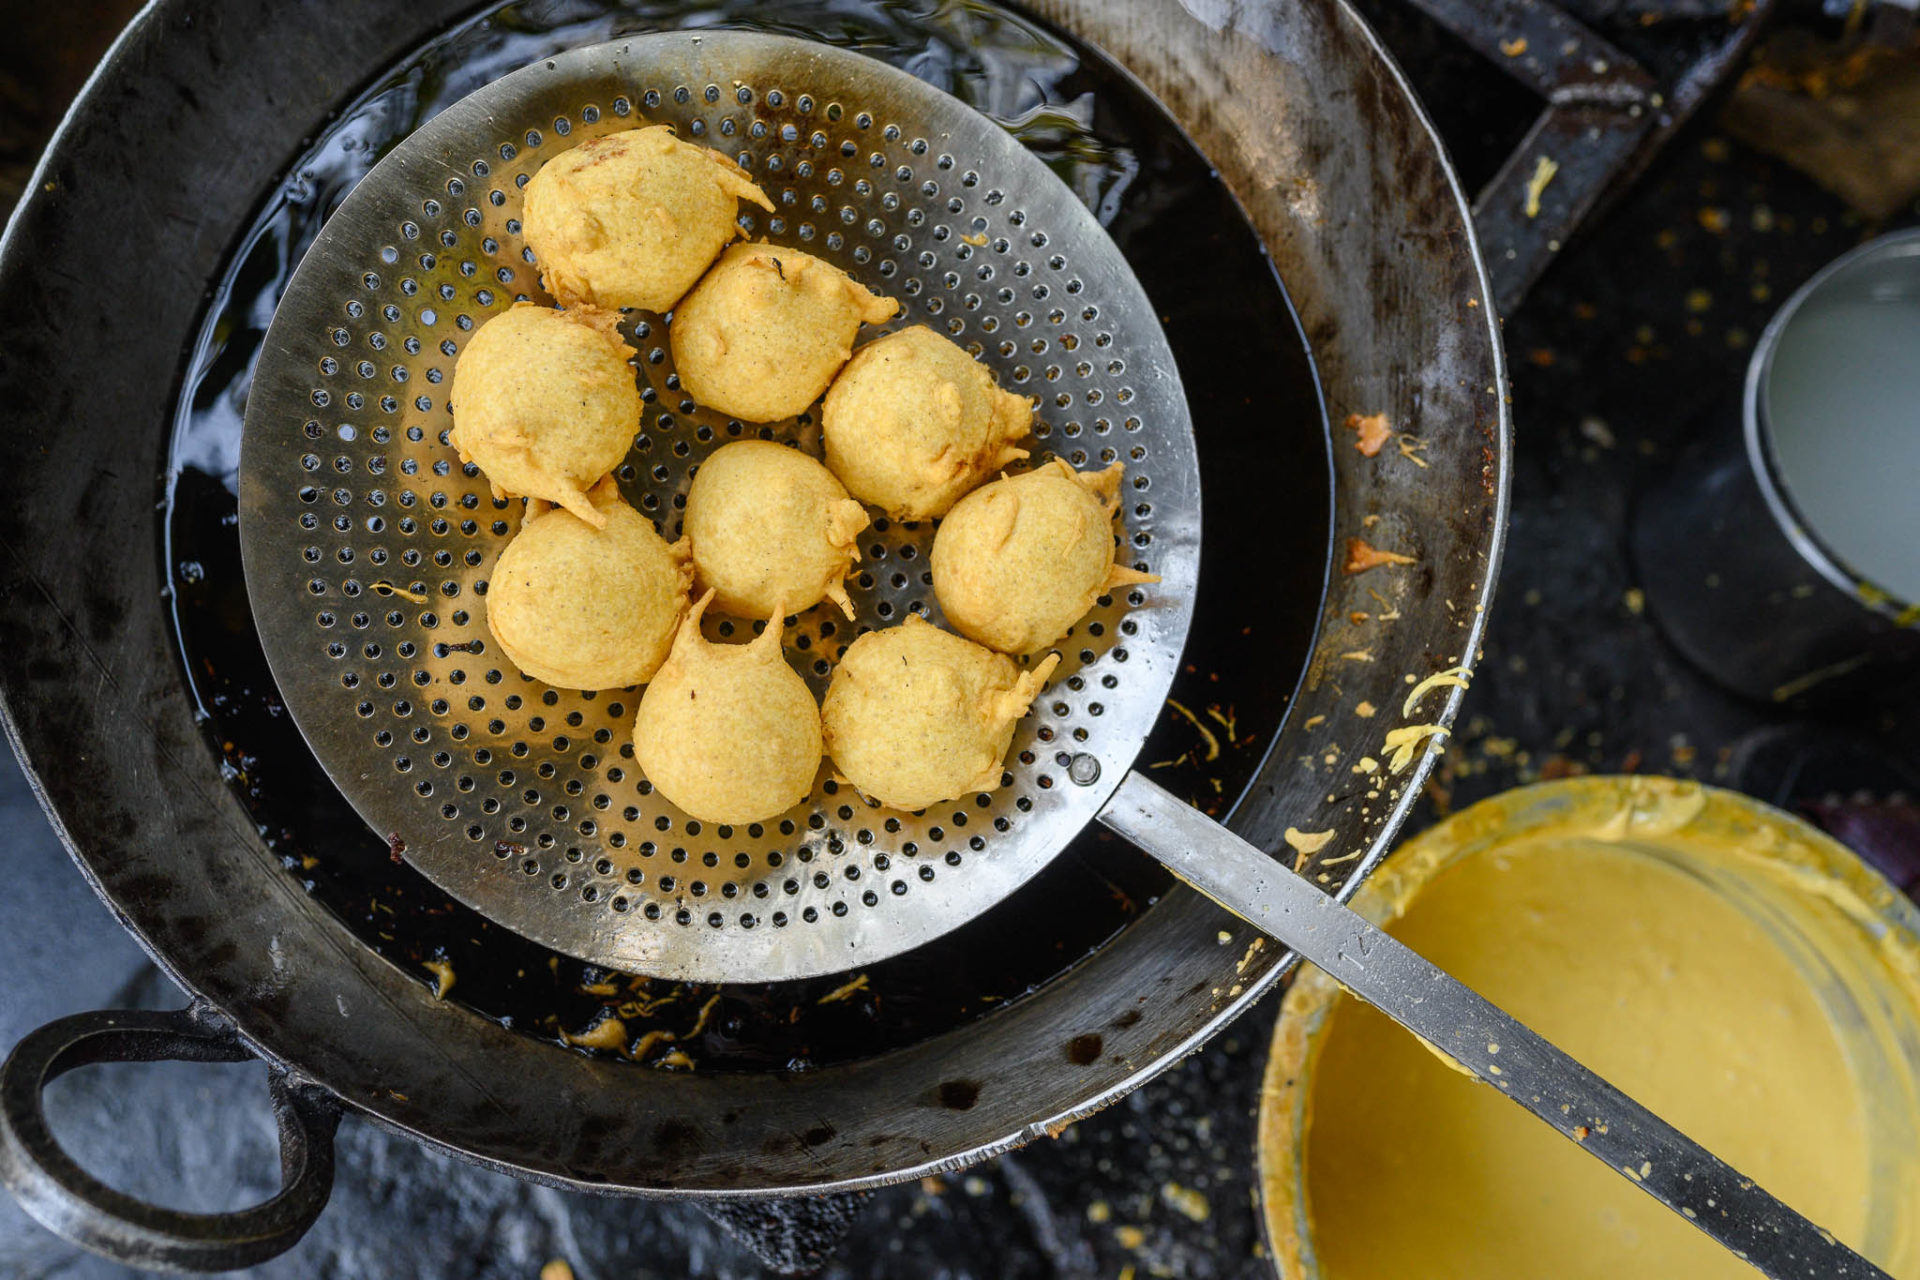 A fresh batch of Vadas being fried on the street near the Bombay High Court